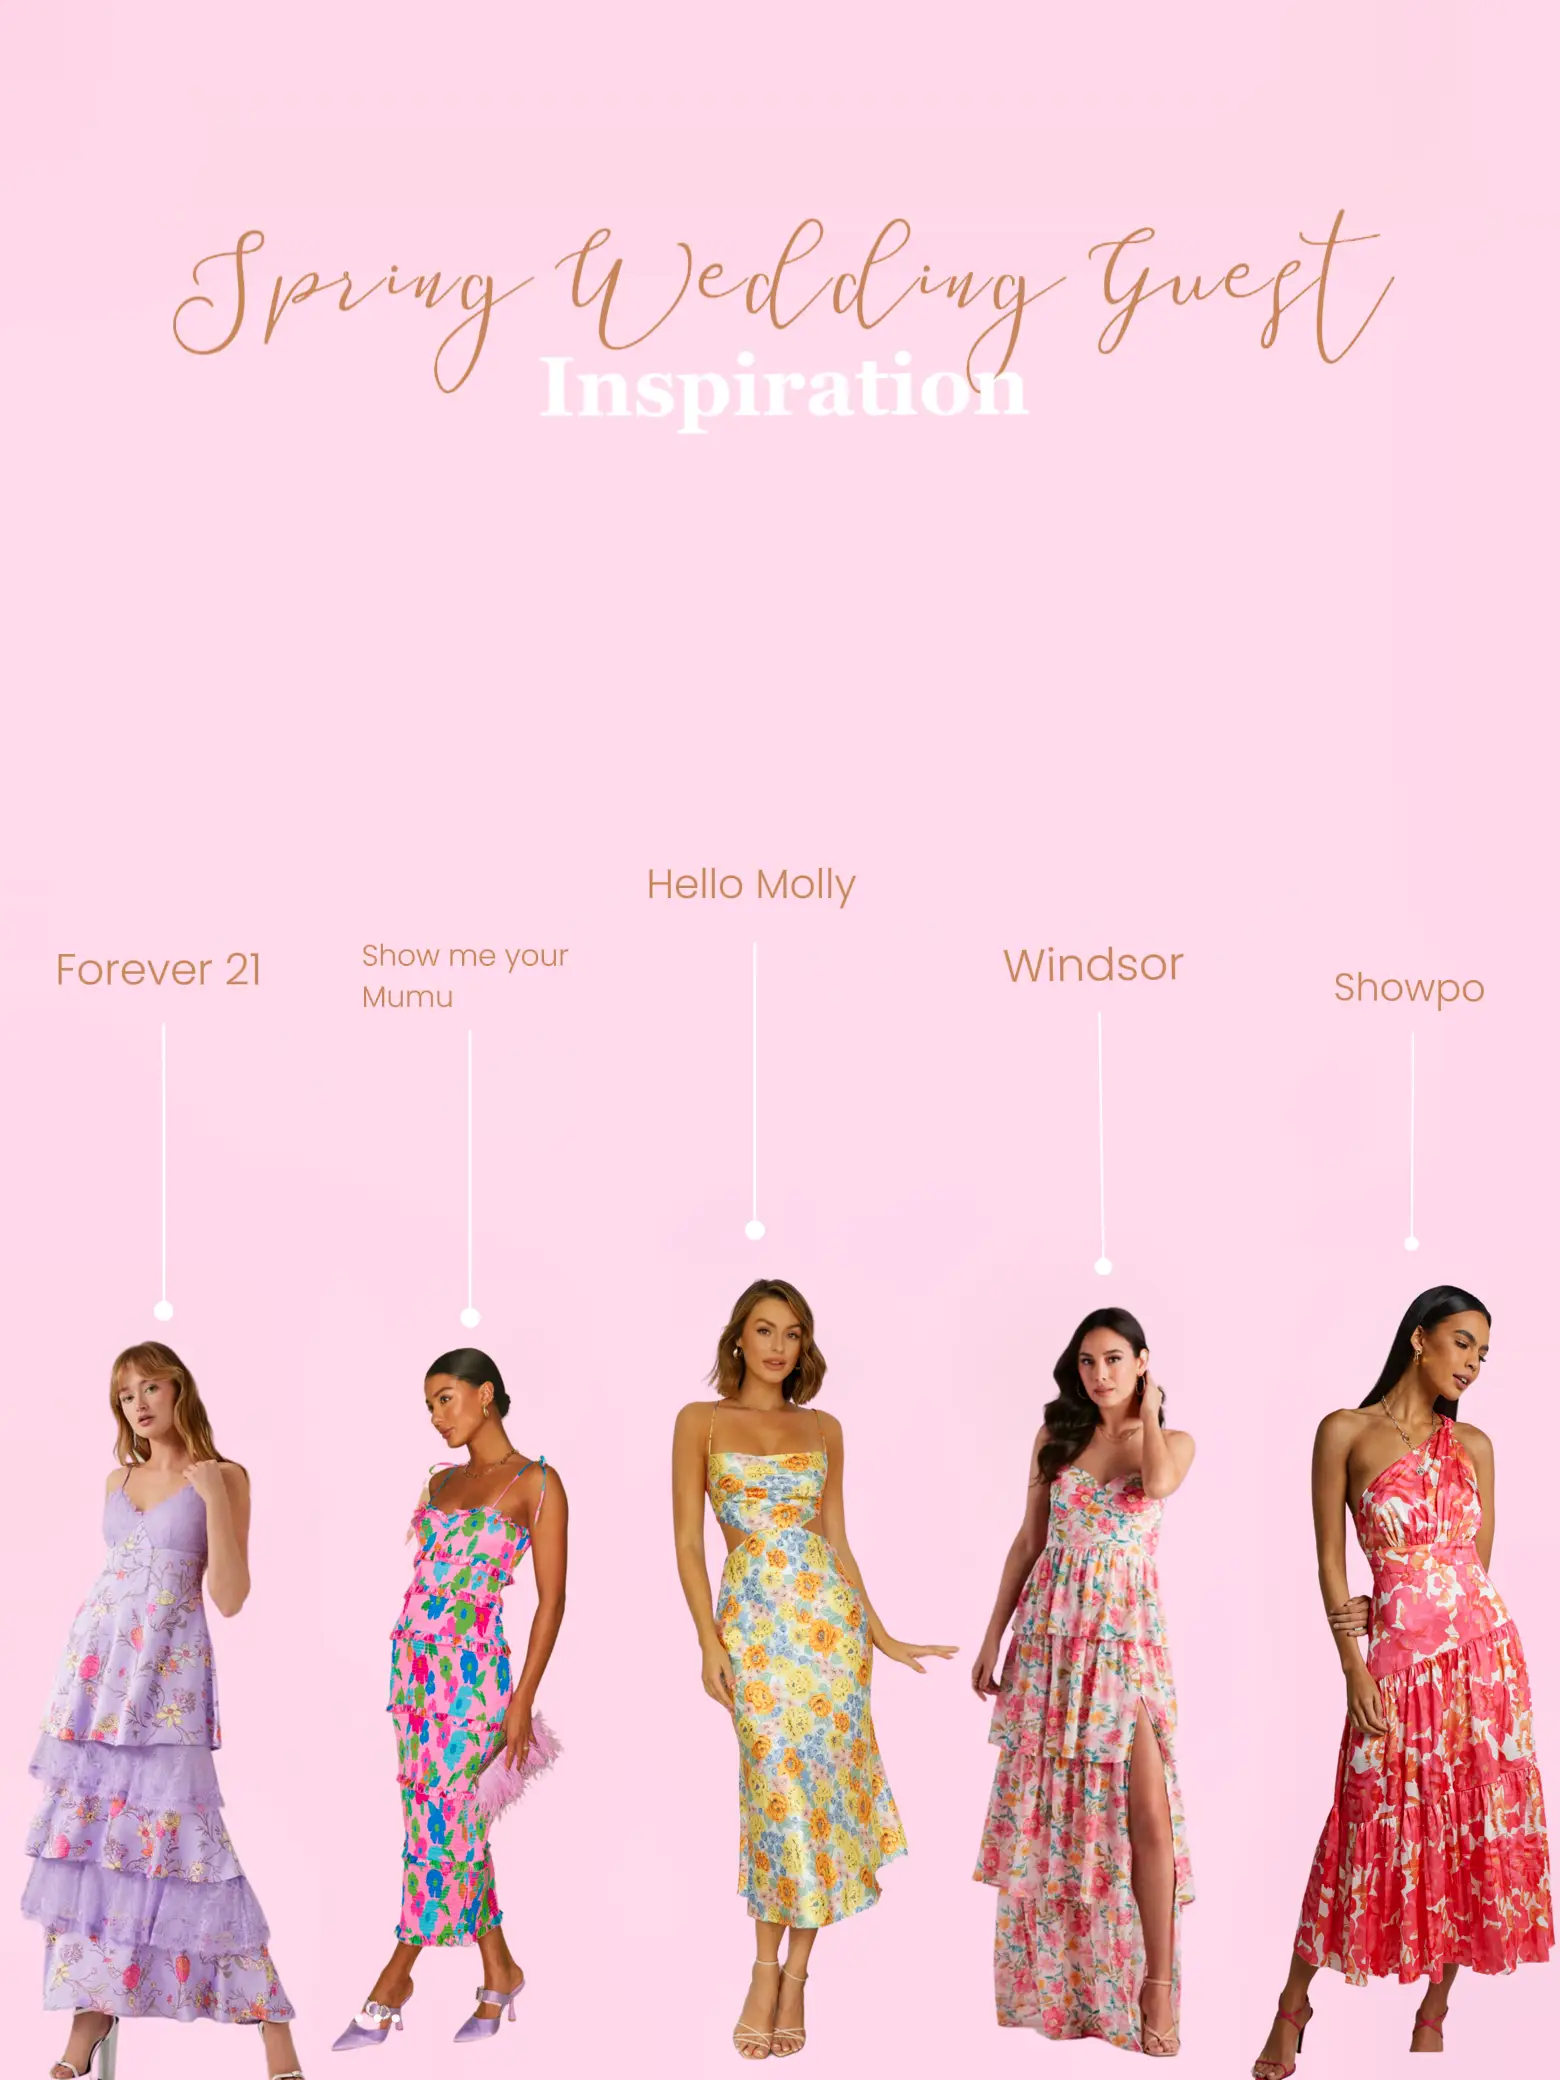 SilkFred.com - Spring wedding in the diary? 💐 Say hello to the